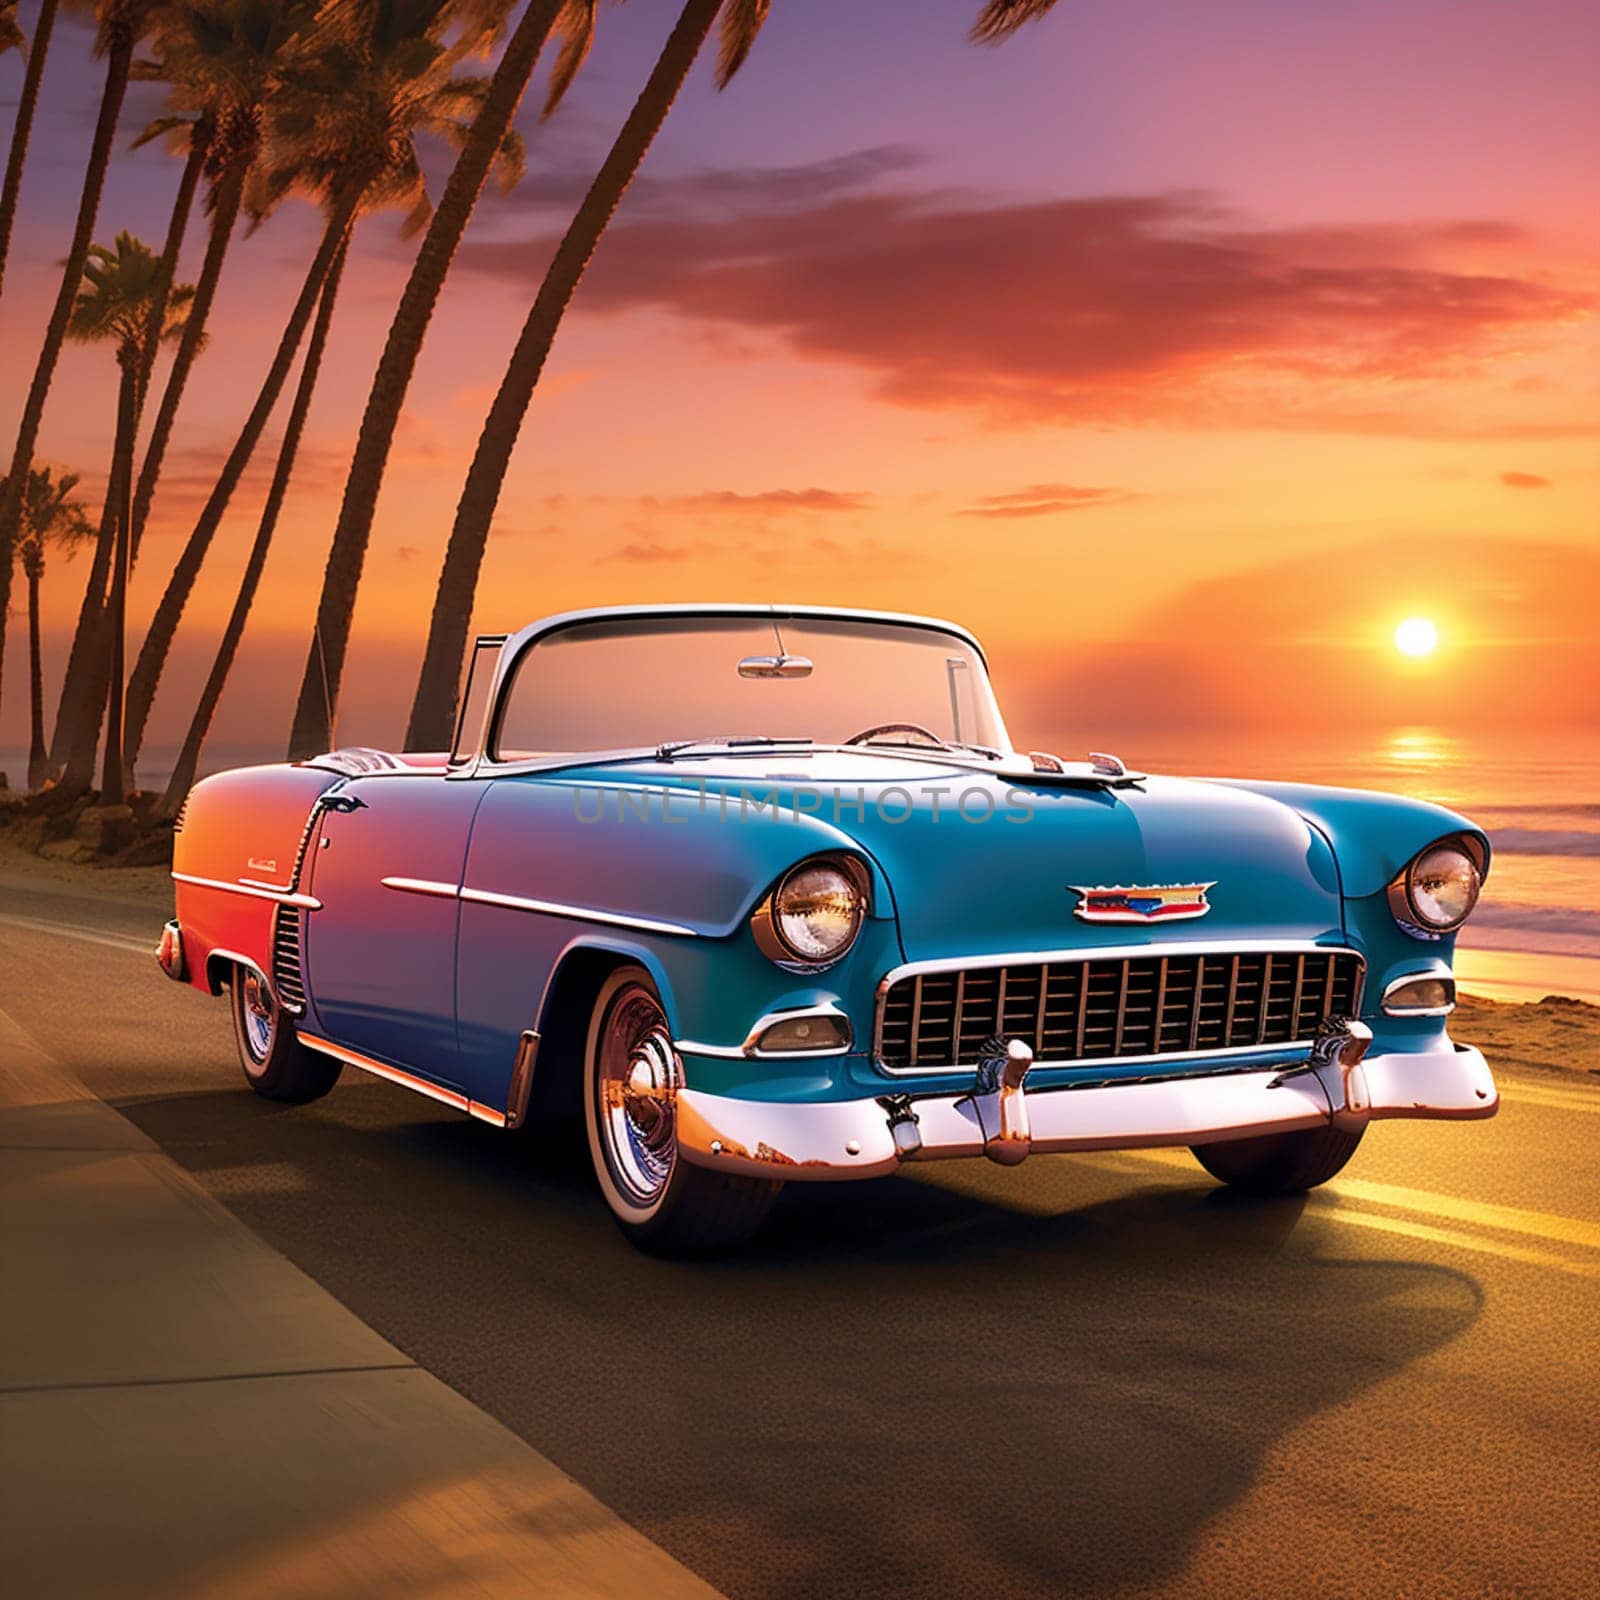 Step into the enchanting era of classic automobiles with this captivating image titled 'The Golden Era: Admiring Vintage Cars'. Transport yourself to a timeless scene that pays homage to the undeniable allure of vintage cars. Marvel at a meticulously restored 1950s convertible effortlessly gliding along a scenic coastal road against a picturesque sunset backdrop. The vibrant hues of the summer sky seamlessly blend with the gleaming exterior of the car, exuding an air of nostalgia and adventure. Witness a couple, elegantly dressed in vintage attire, enjoying a romantic drive along the coast, their smiles reflecting the carefree spirit of the era. This image embraces the aesthetic of the golden age of vintage cars, inviting viewers to experience an era brimming with elegance, style, and the joy of open-road exploration.